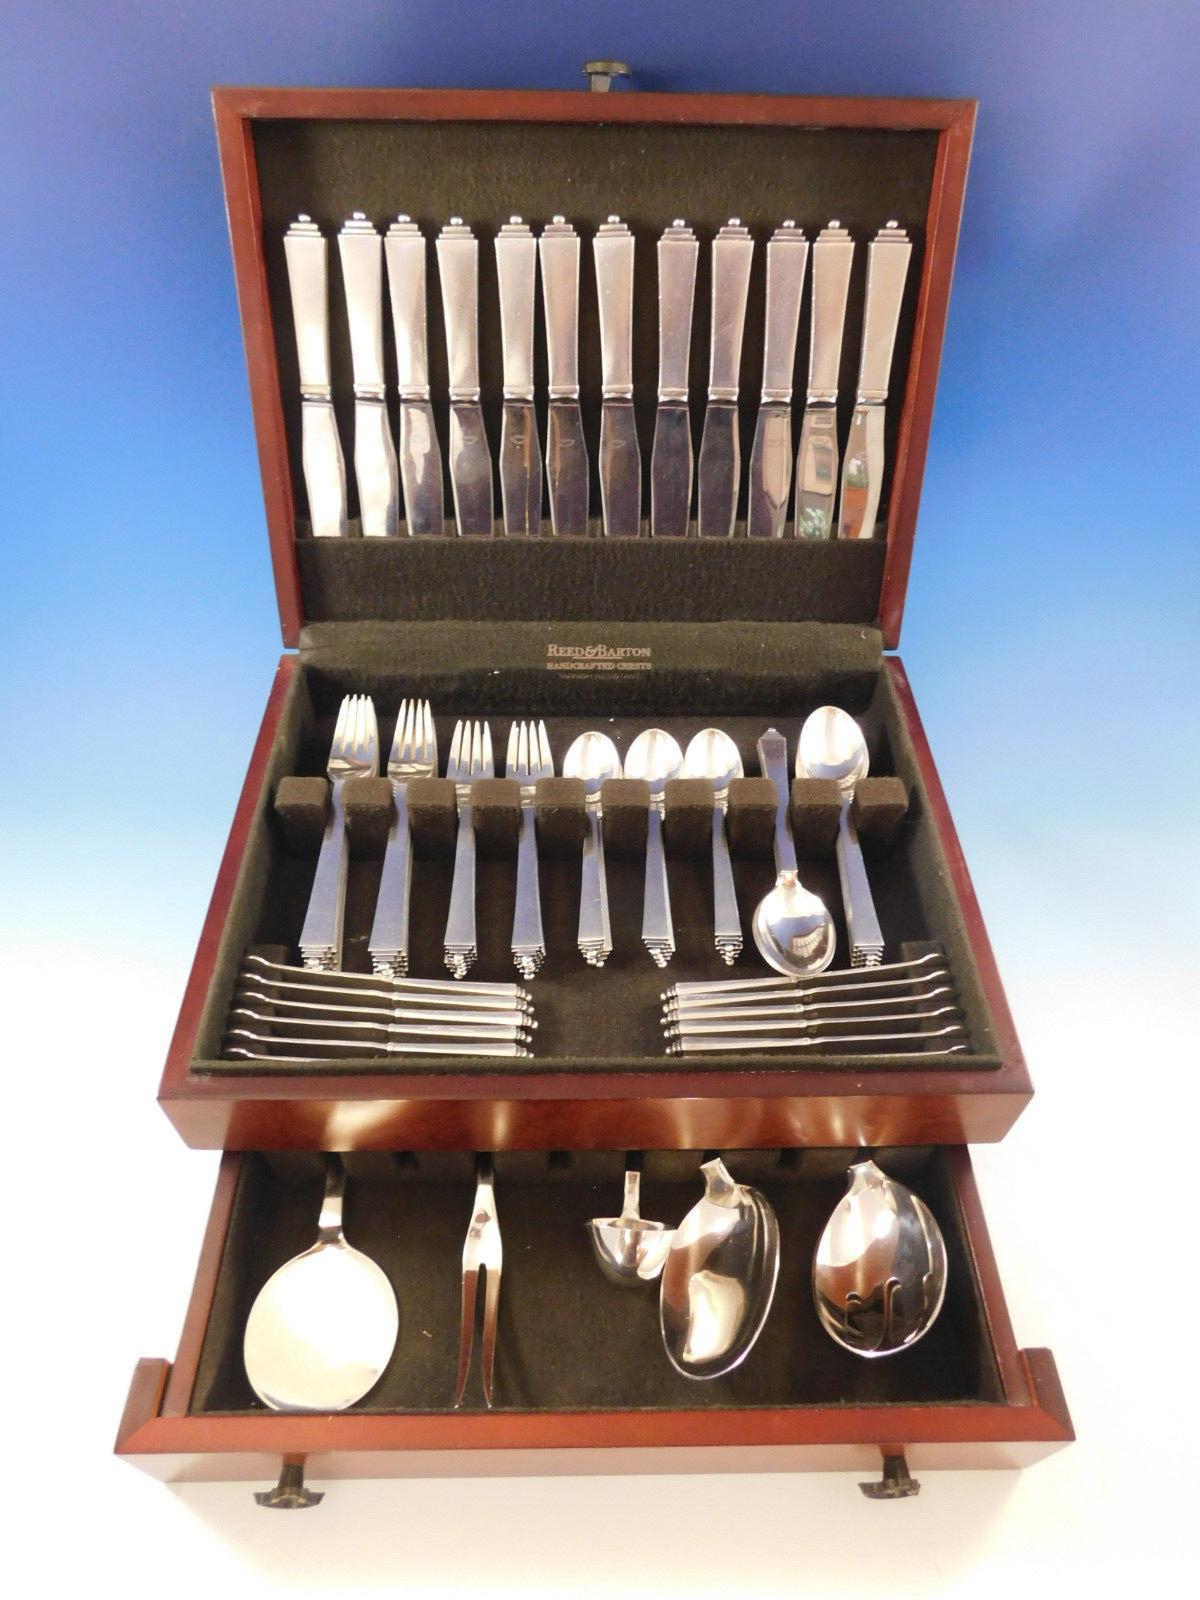 Superb dinner size pyramid by Georg Jensen sterling silver flatware set, 78 pieces. This set includes:

12 dinner knives, short handle, 8 7/8